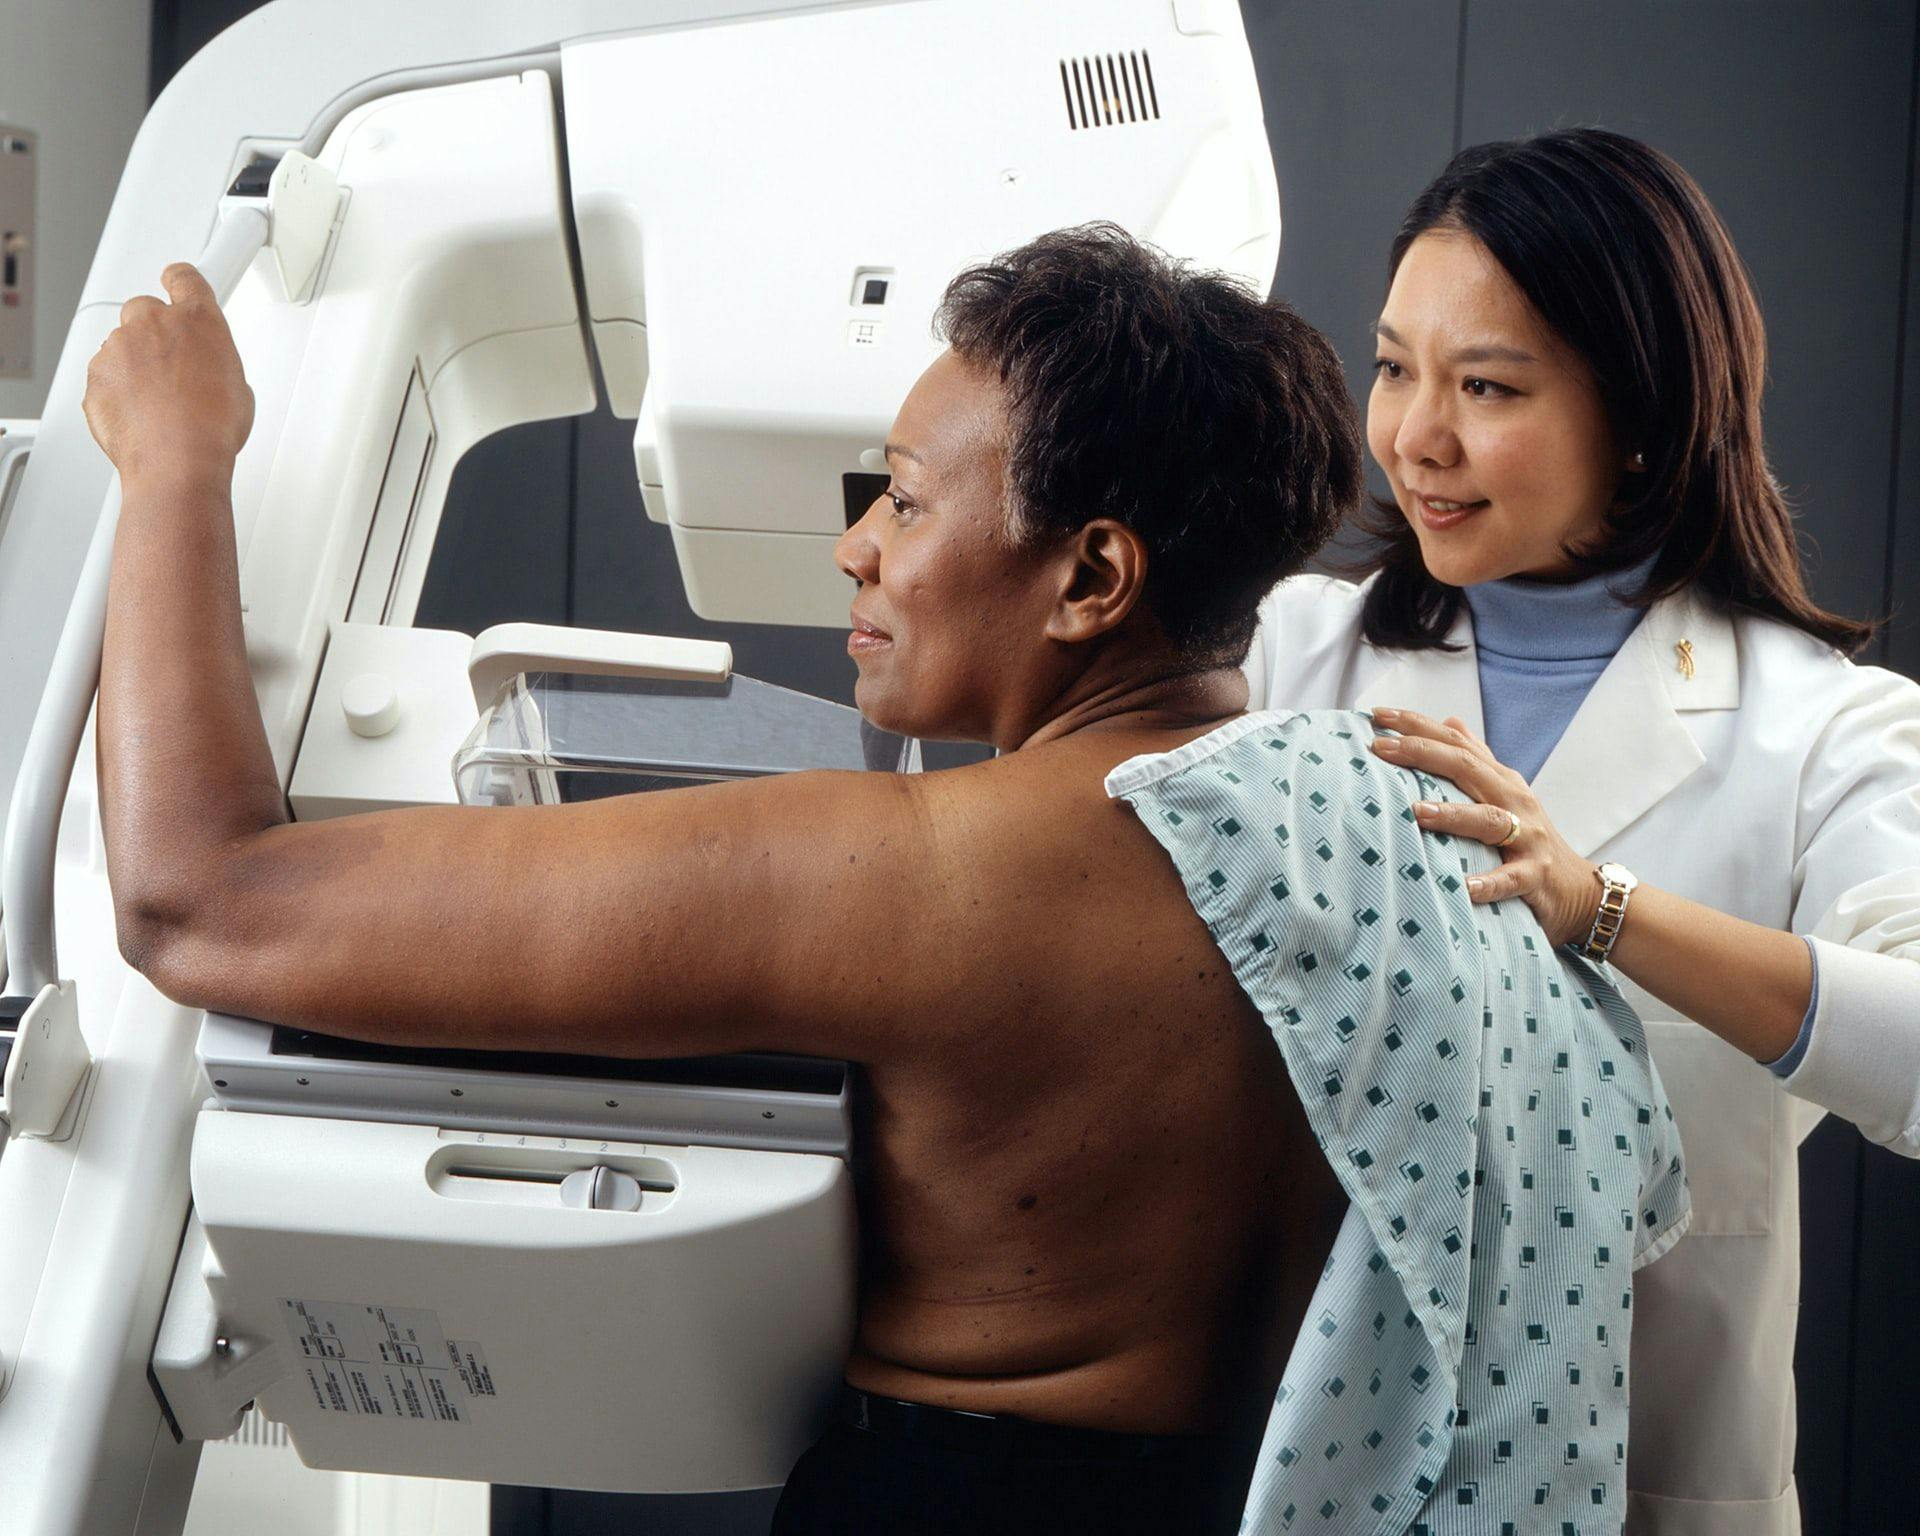 Mammography screening reduces rates of breast cancer mortality